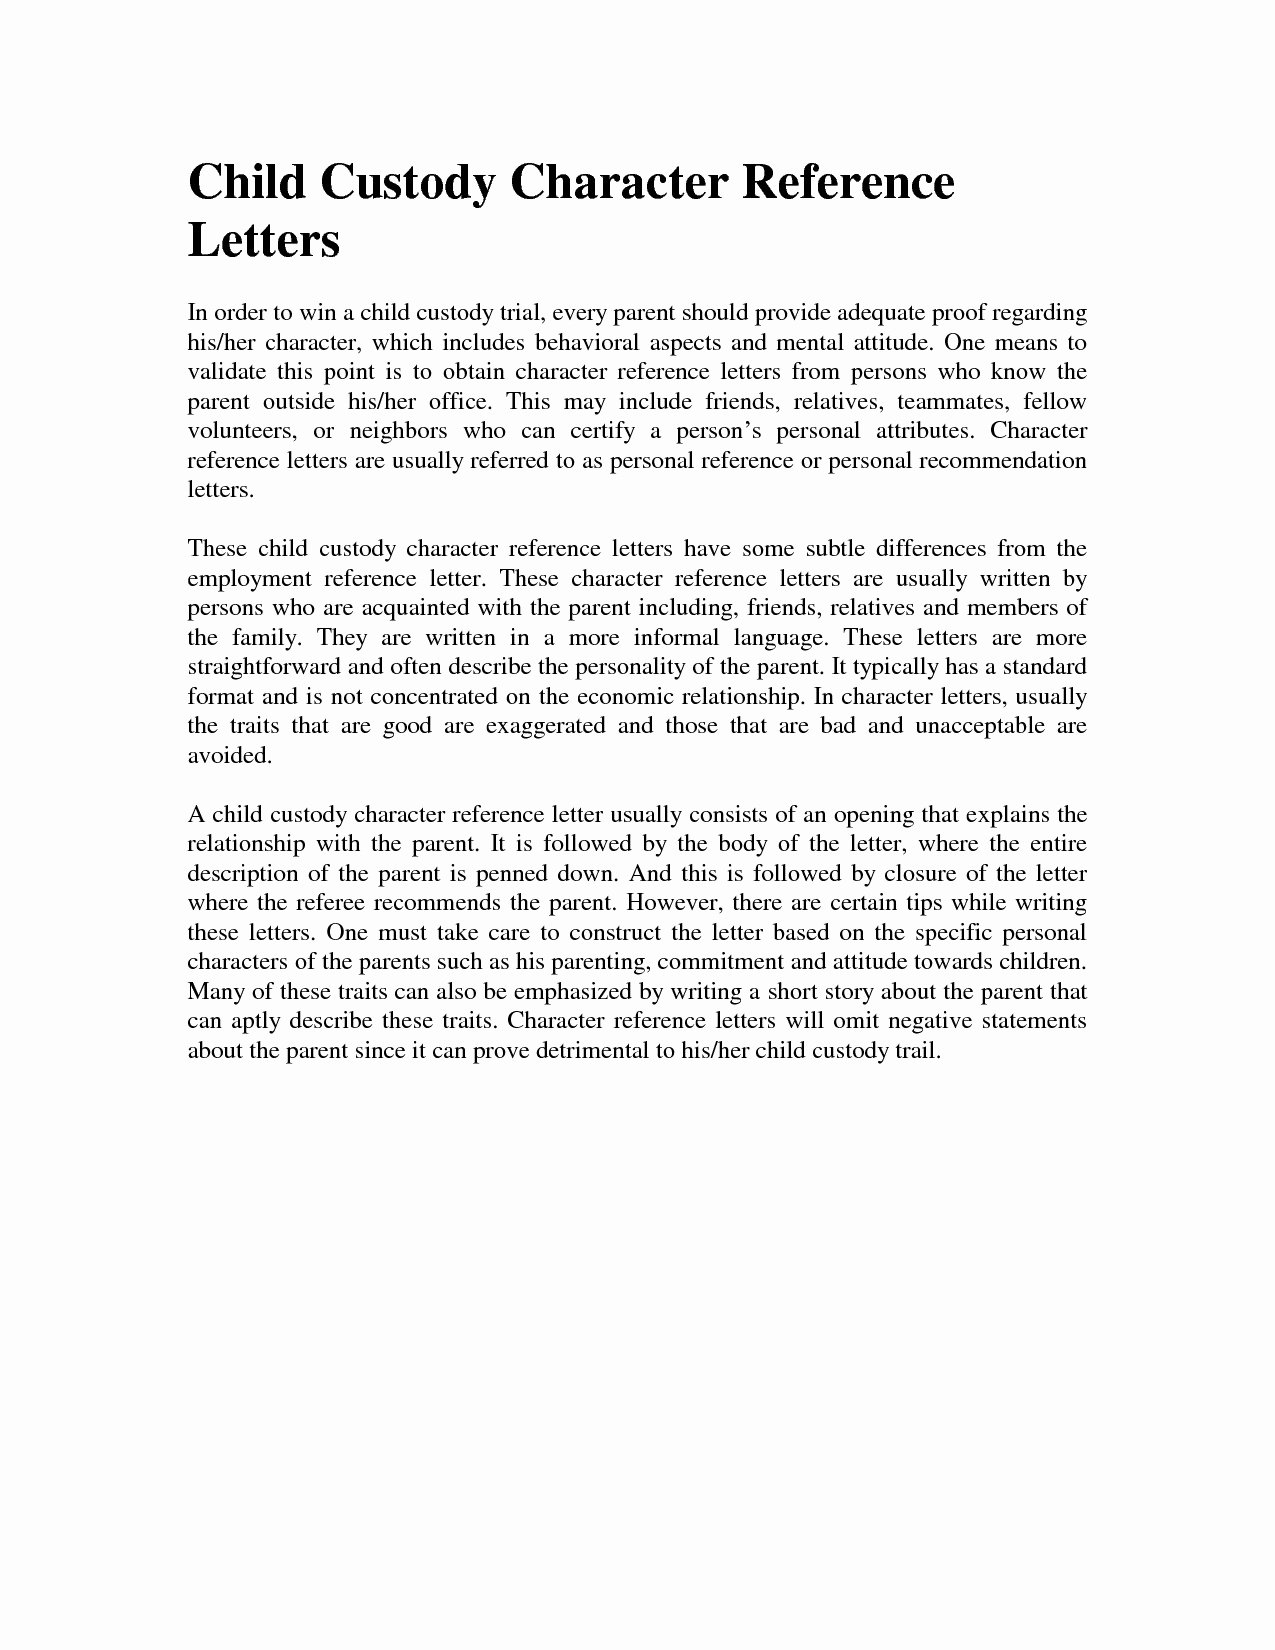 Letter format for Court Best Of Character Reference Letter for Court Child Custody